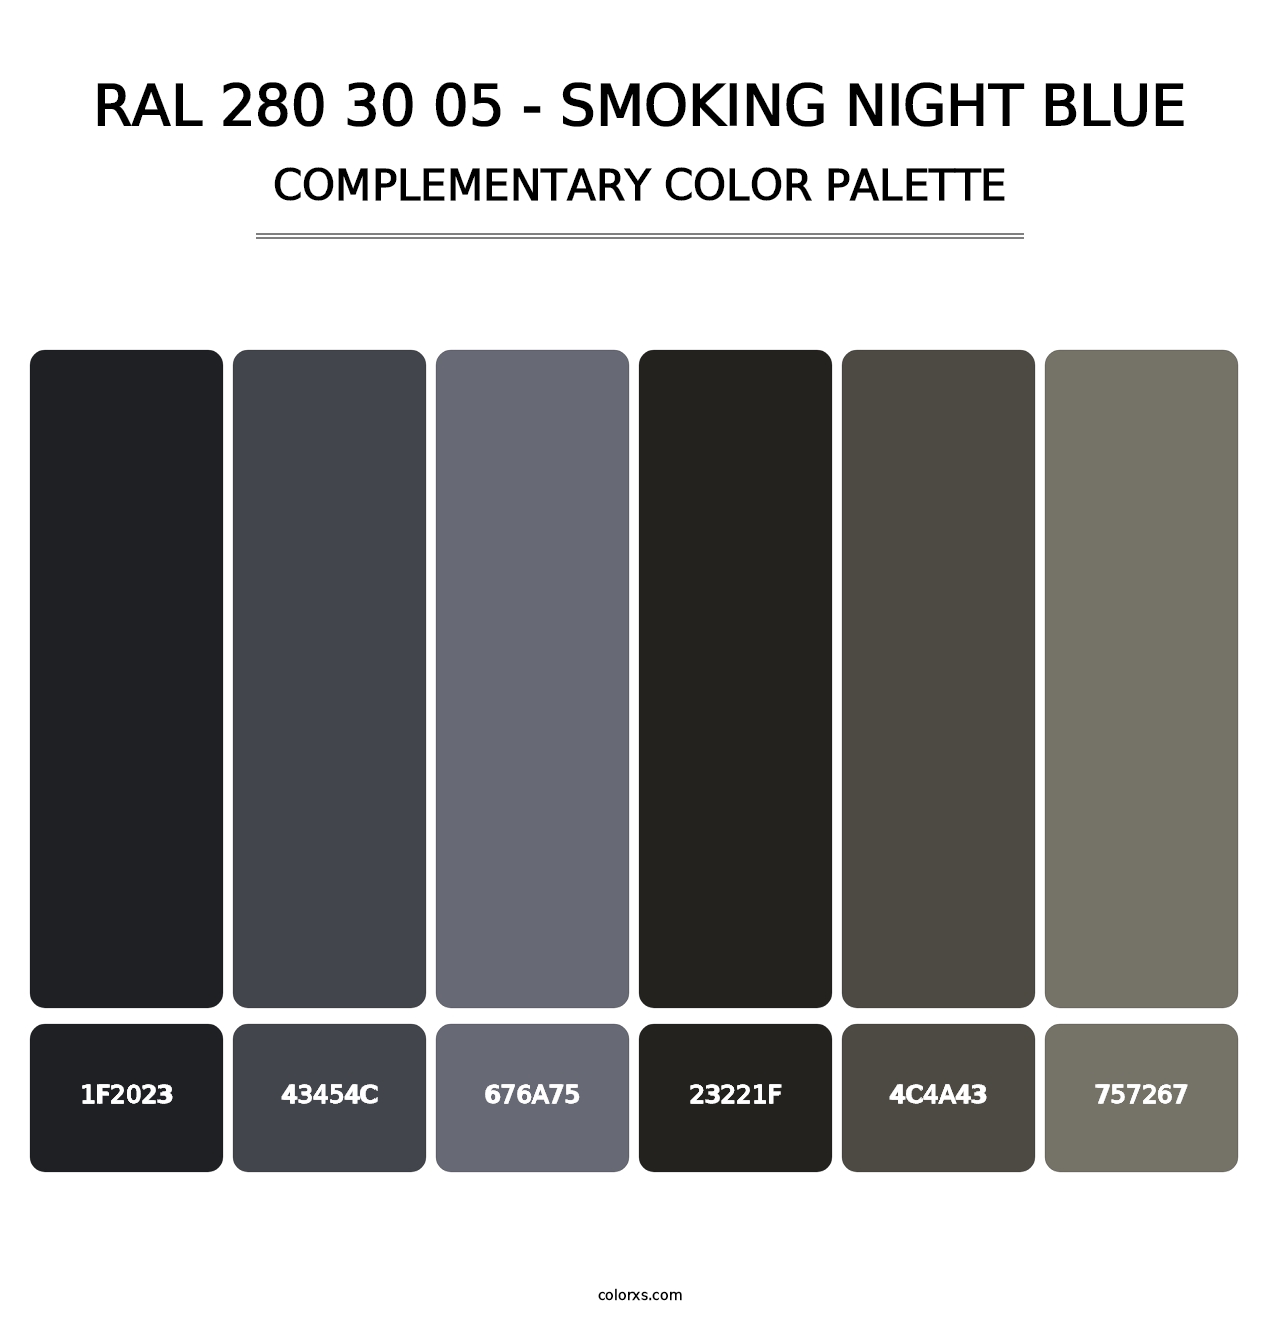 RAL 280 30 05 - Smoking Night Blue - Complementary Color Palette